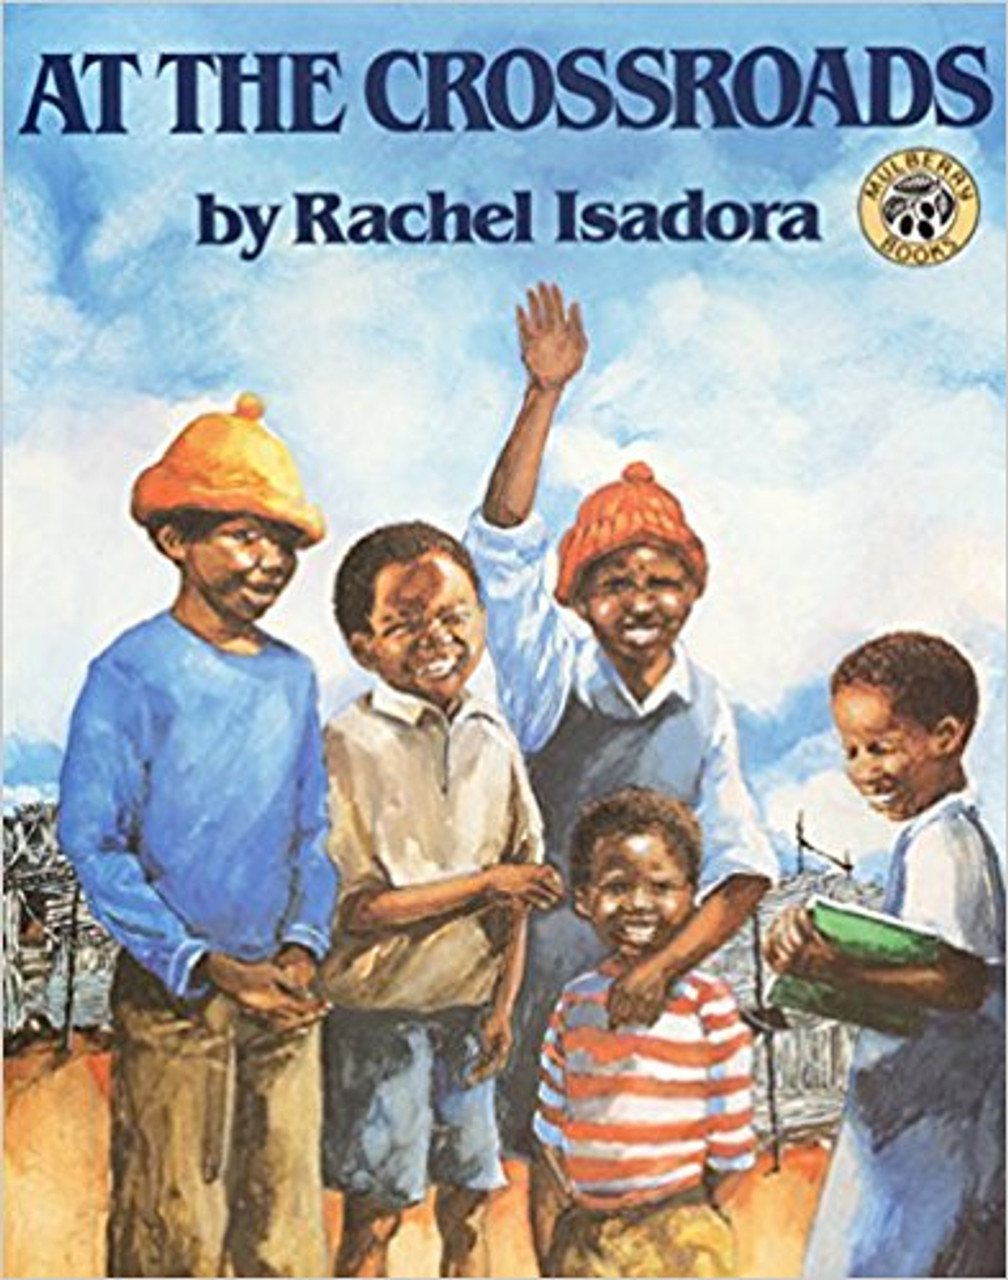 The children of a South African village eagerly gather at the crossroads to welcome their fathers, who have been away for months working in the mines. Lush illustrations filled with emotion combine with a simple text to introduce American children to a unique place and group of people. "A beautiful, bridge-building book".--Kirkus Reviews, pointered review. An ALA Notable Book. Full color.